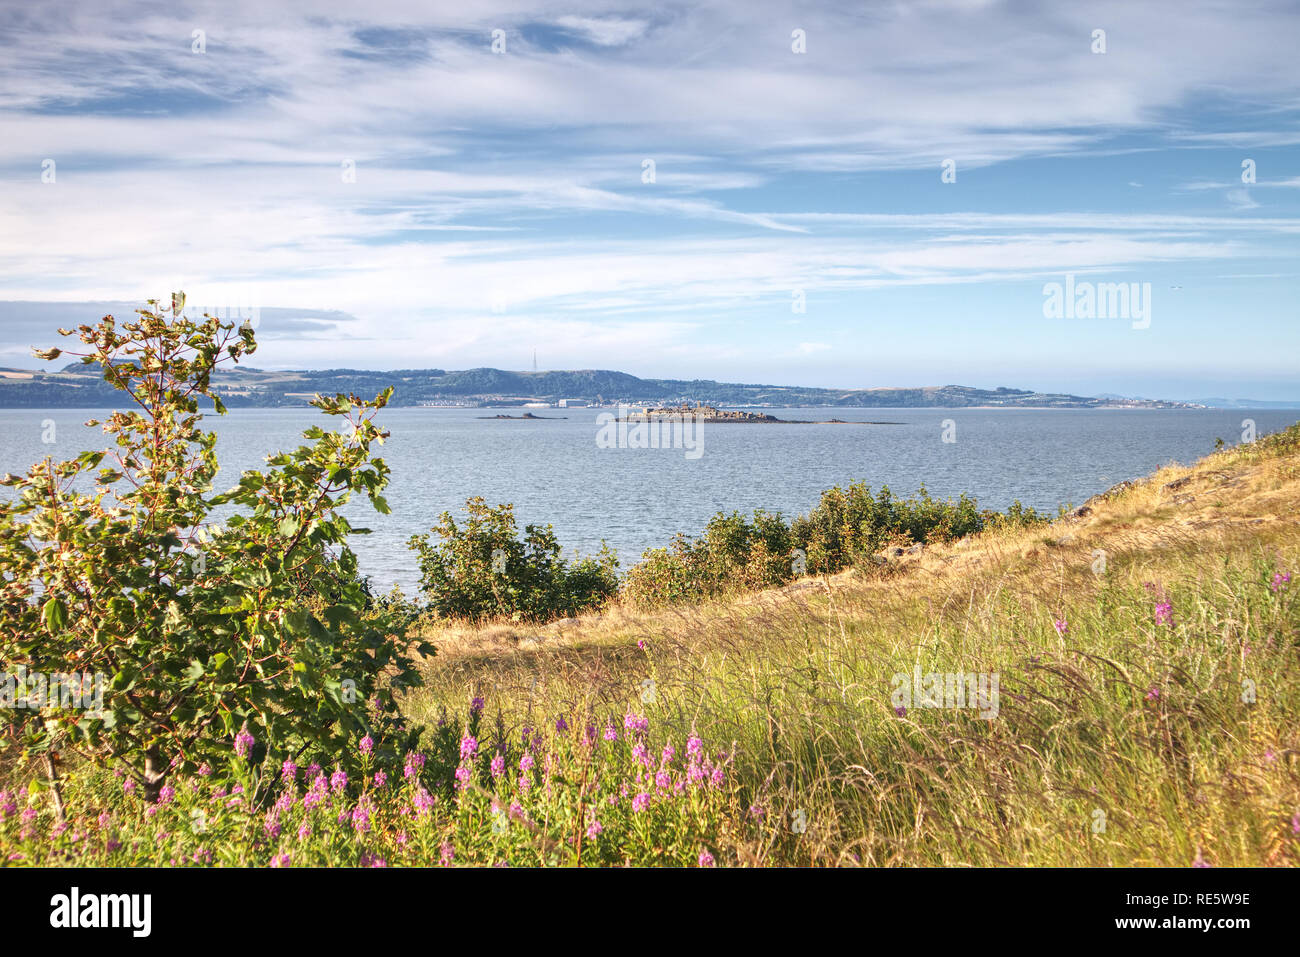 A photograph of the island of Inchmickery in the Firth of Forth, taken from Cramond Island near Edinburgh, Scotland, United Kingdom. Stock Photo